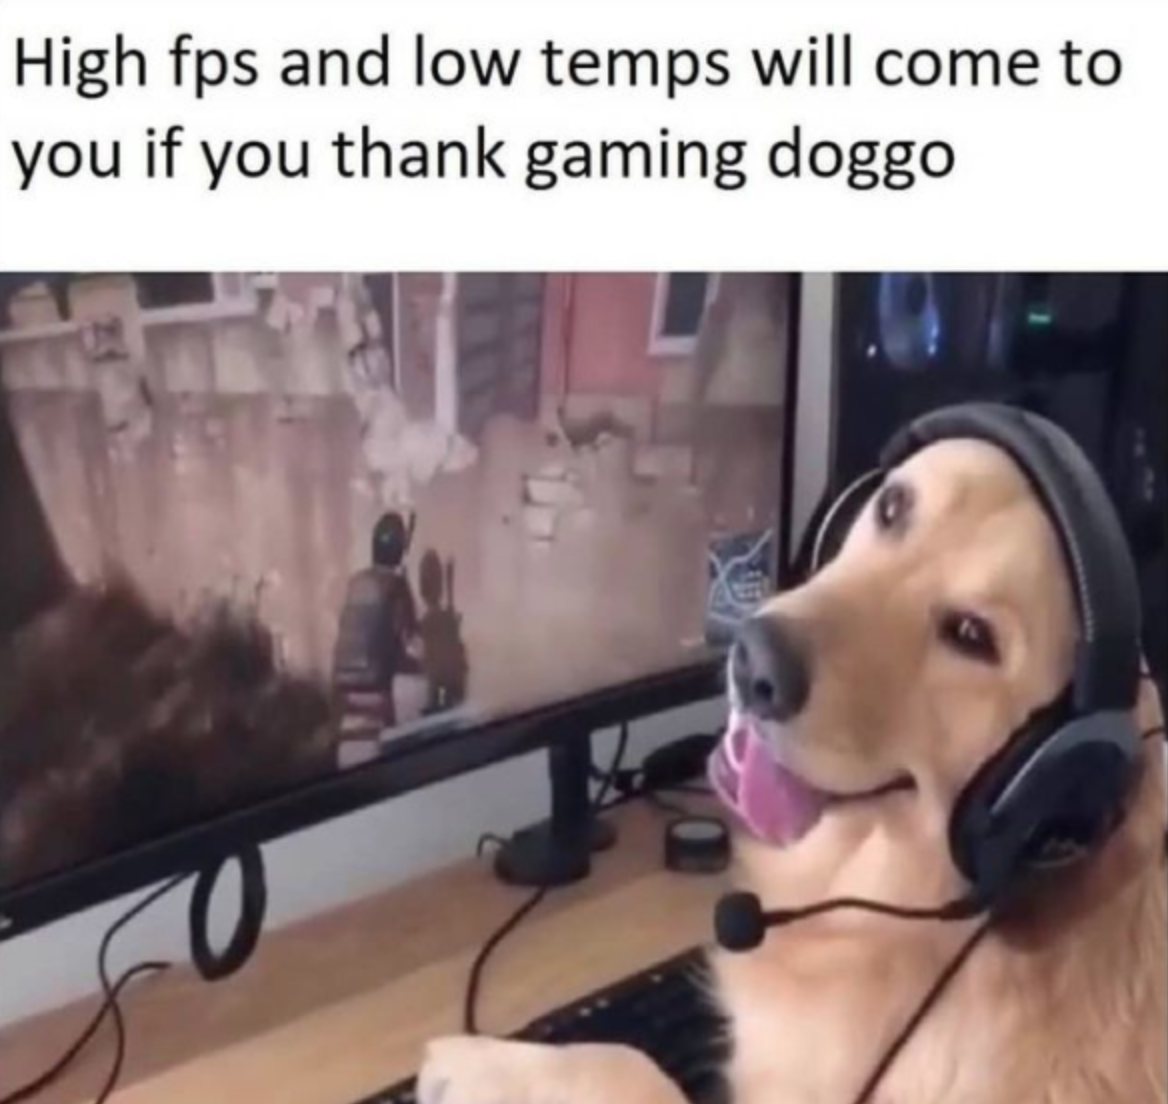 funny gaming memes - thank gaming doggo - High fps and low temps will come to you if you thank gaming doggo